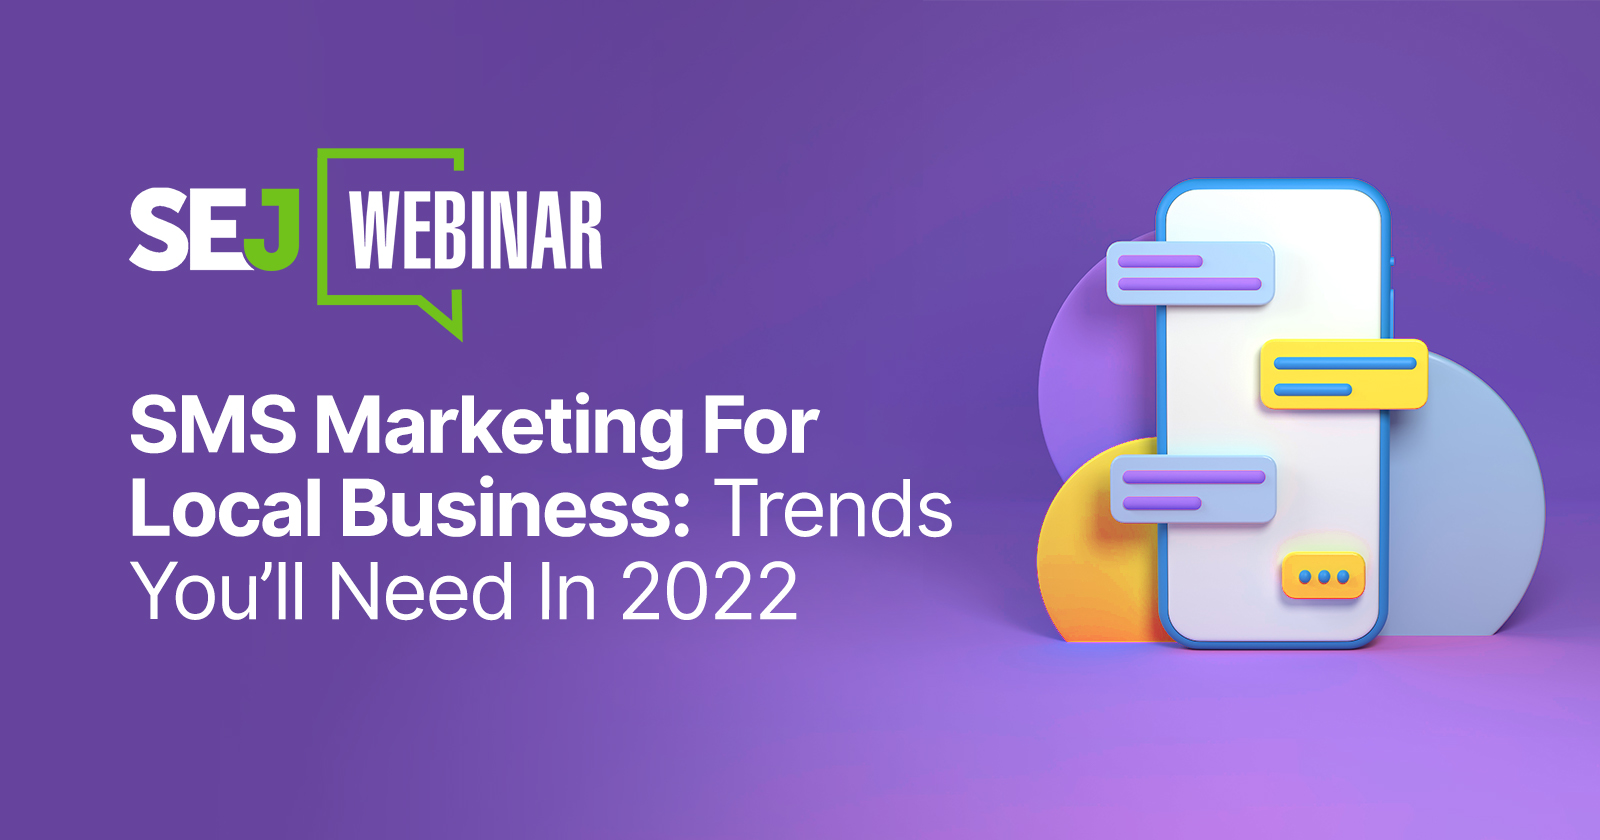 SMS Marketing For Local Business: Trends You'll Need In 2022